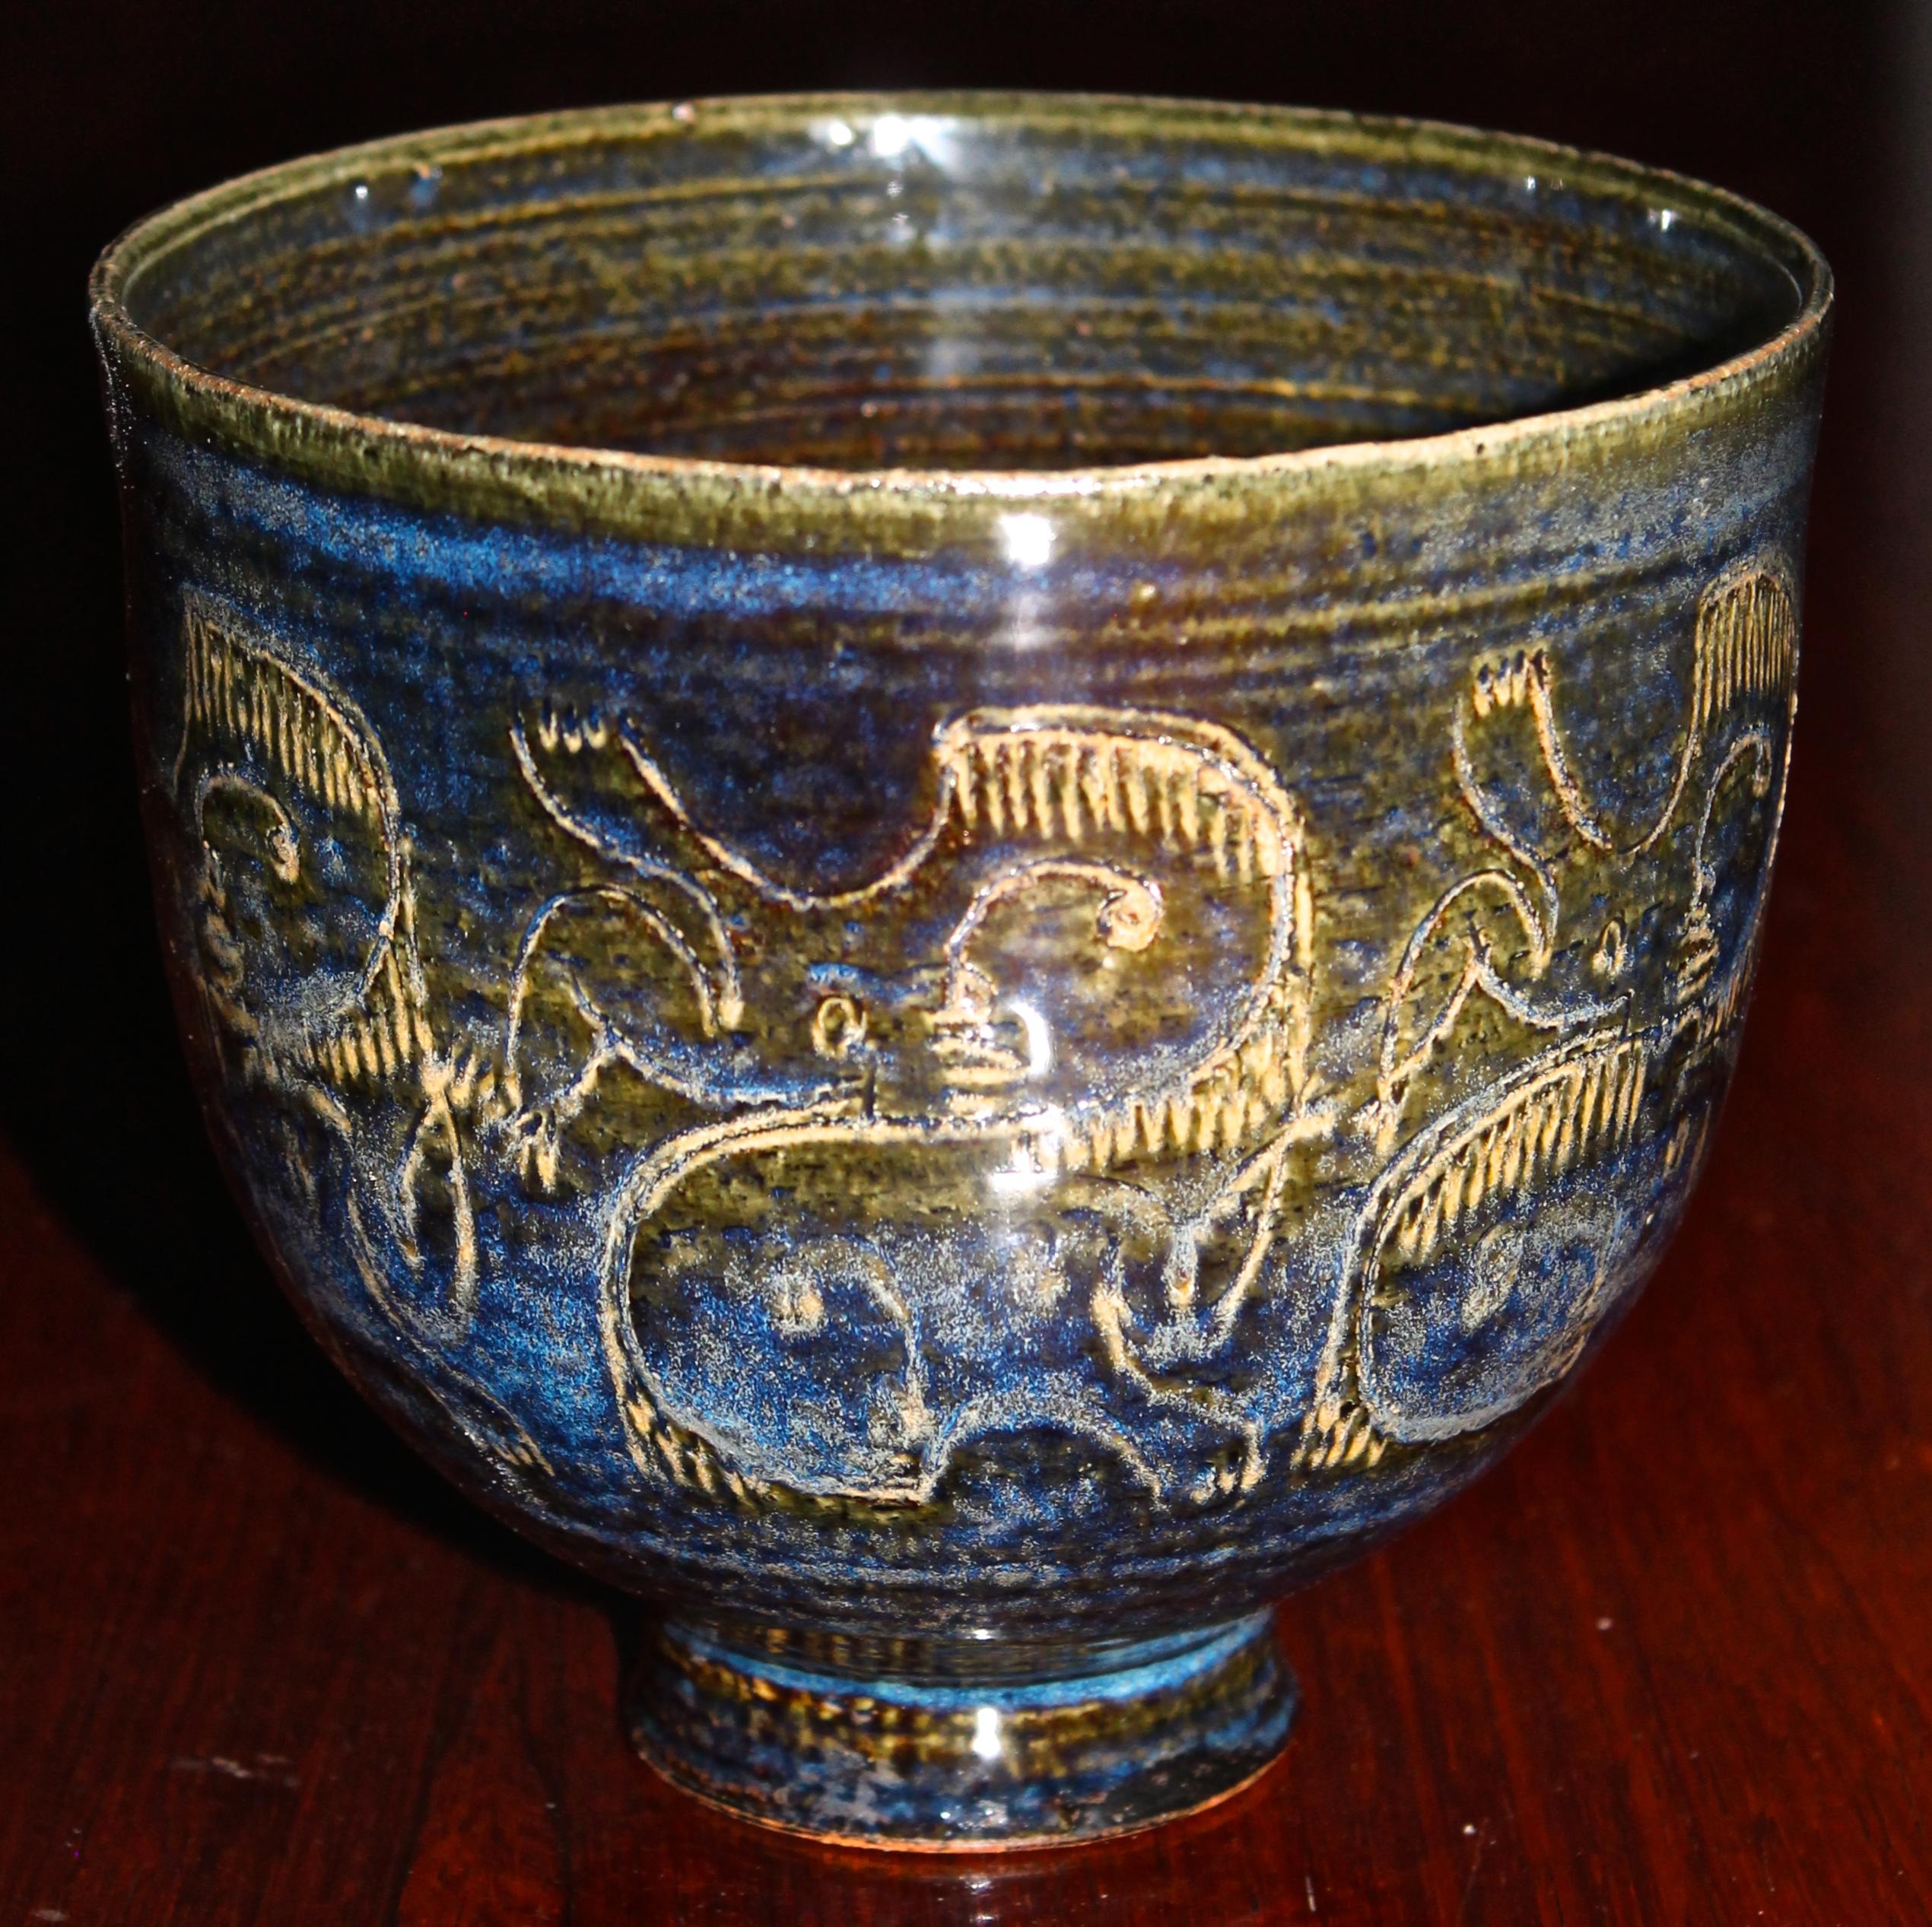 Beautiful richly colored and decorated blue bowl.